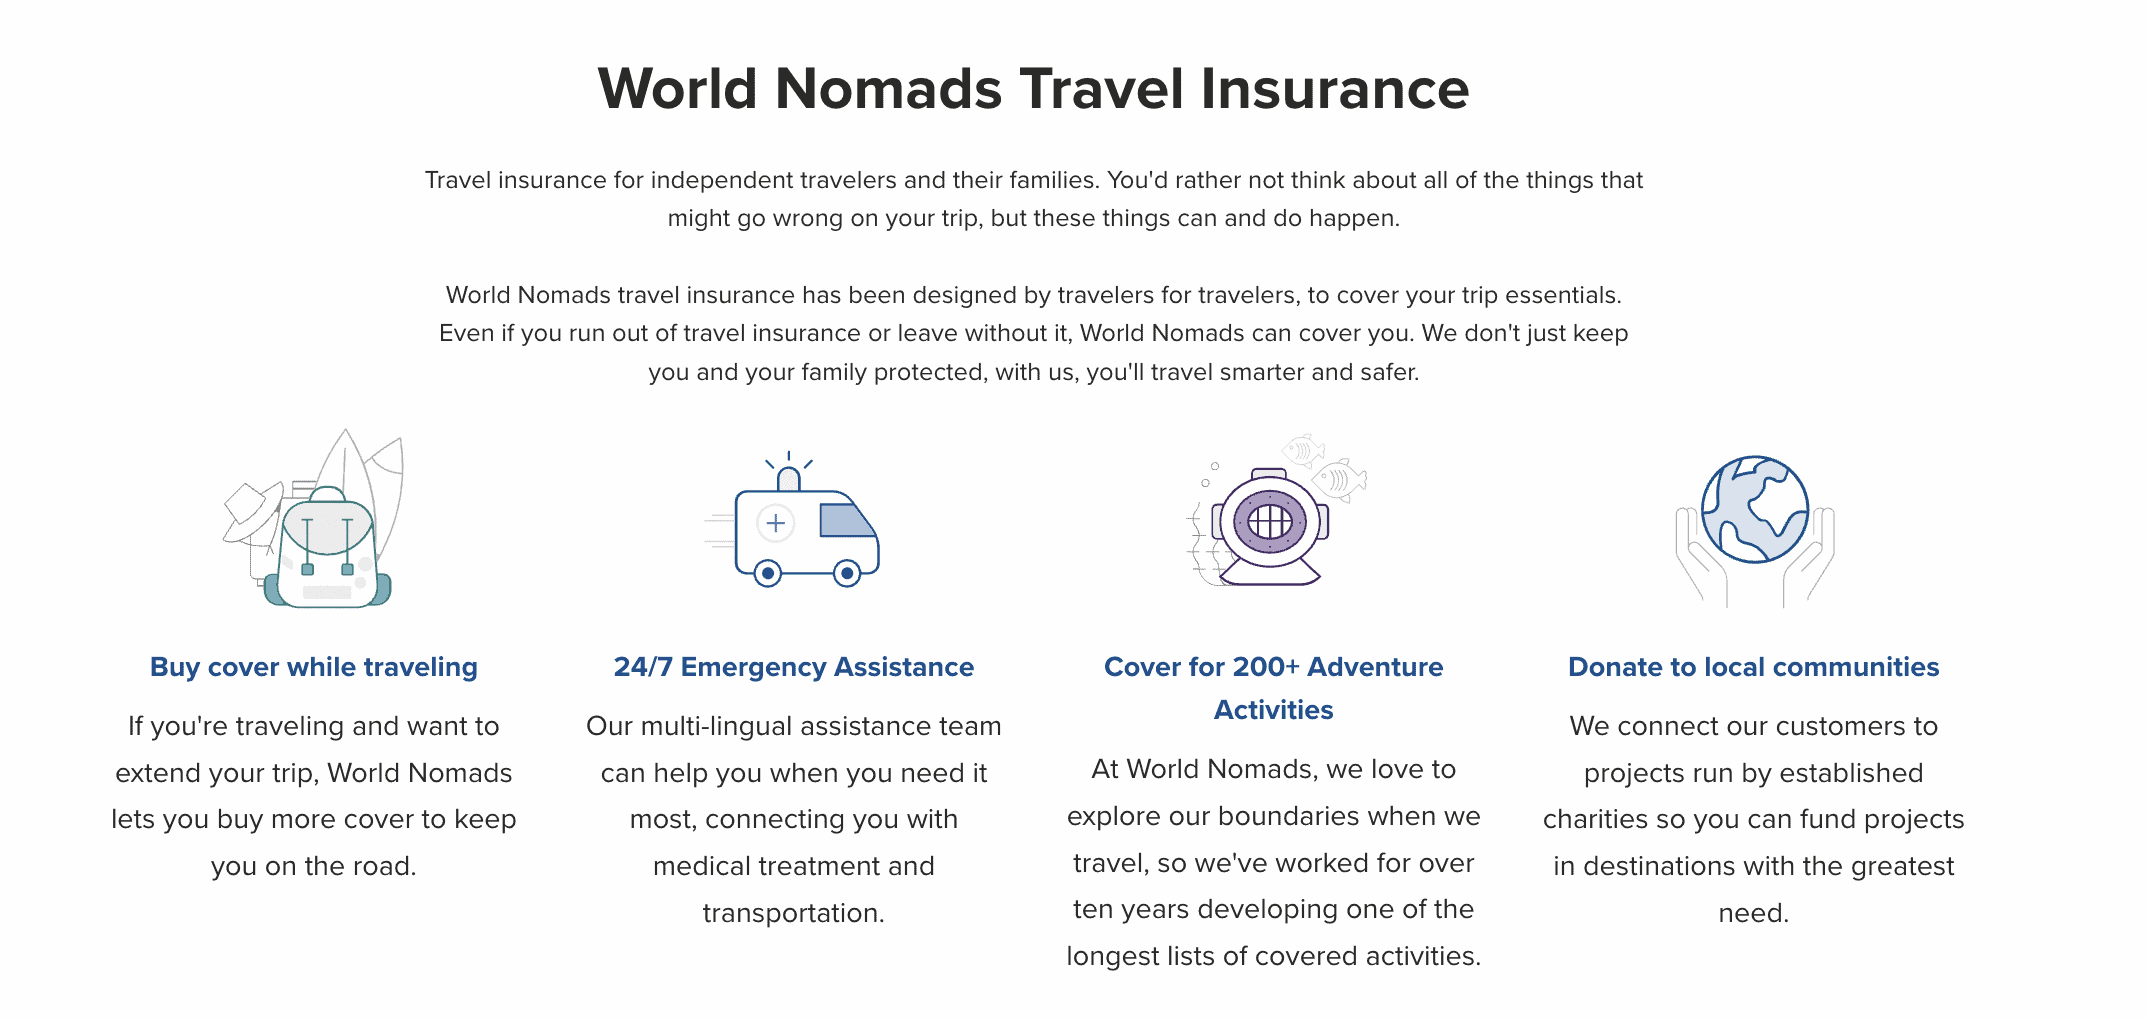 Safetywing vs World Nomads - Best Travel Insurance Compared